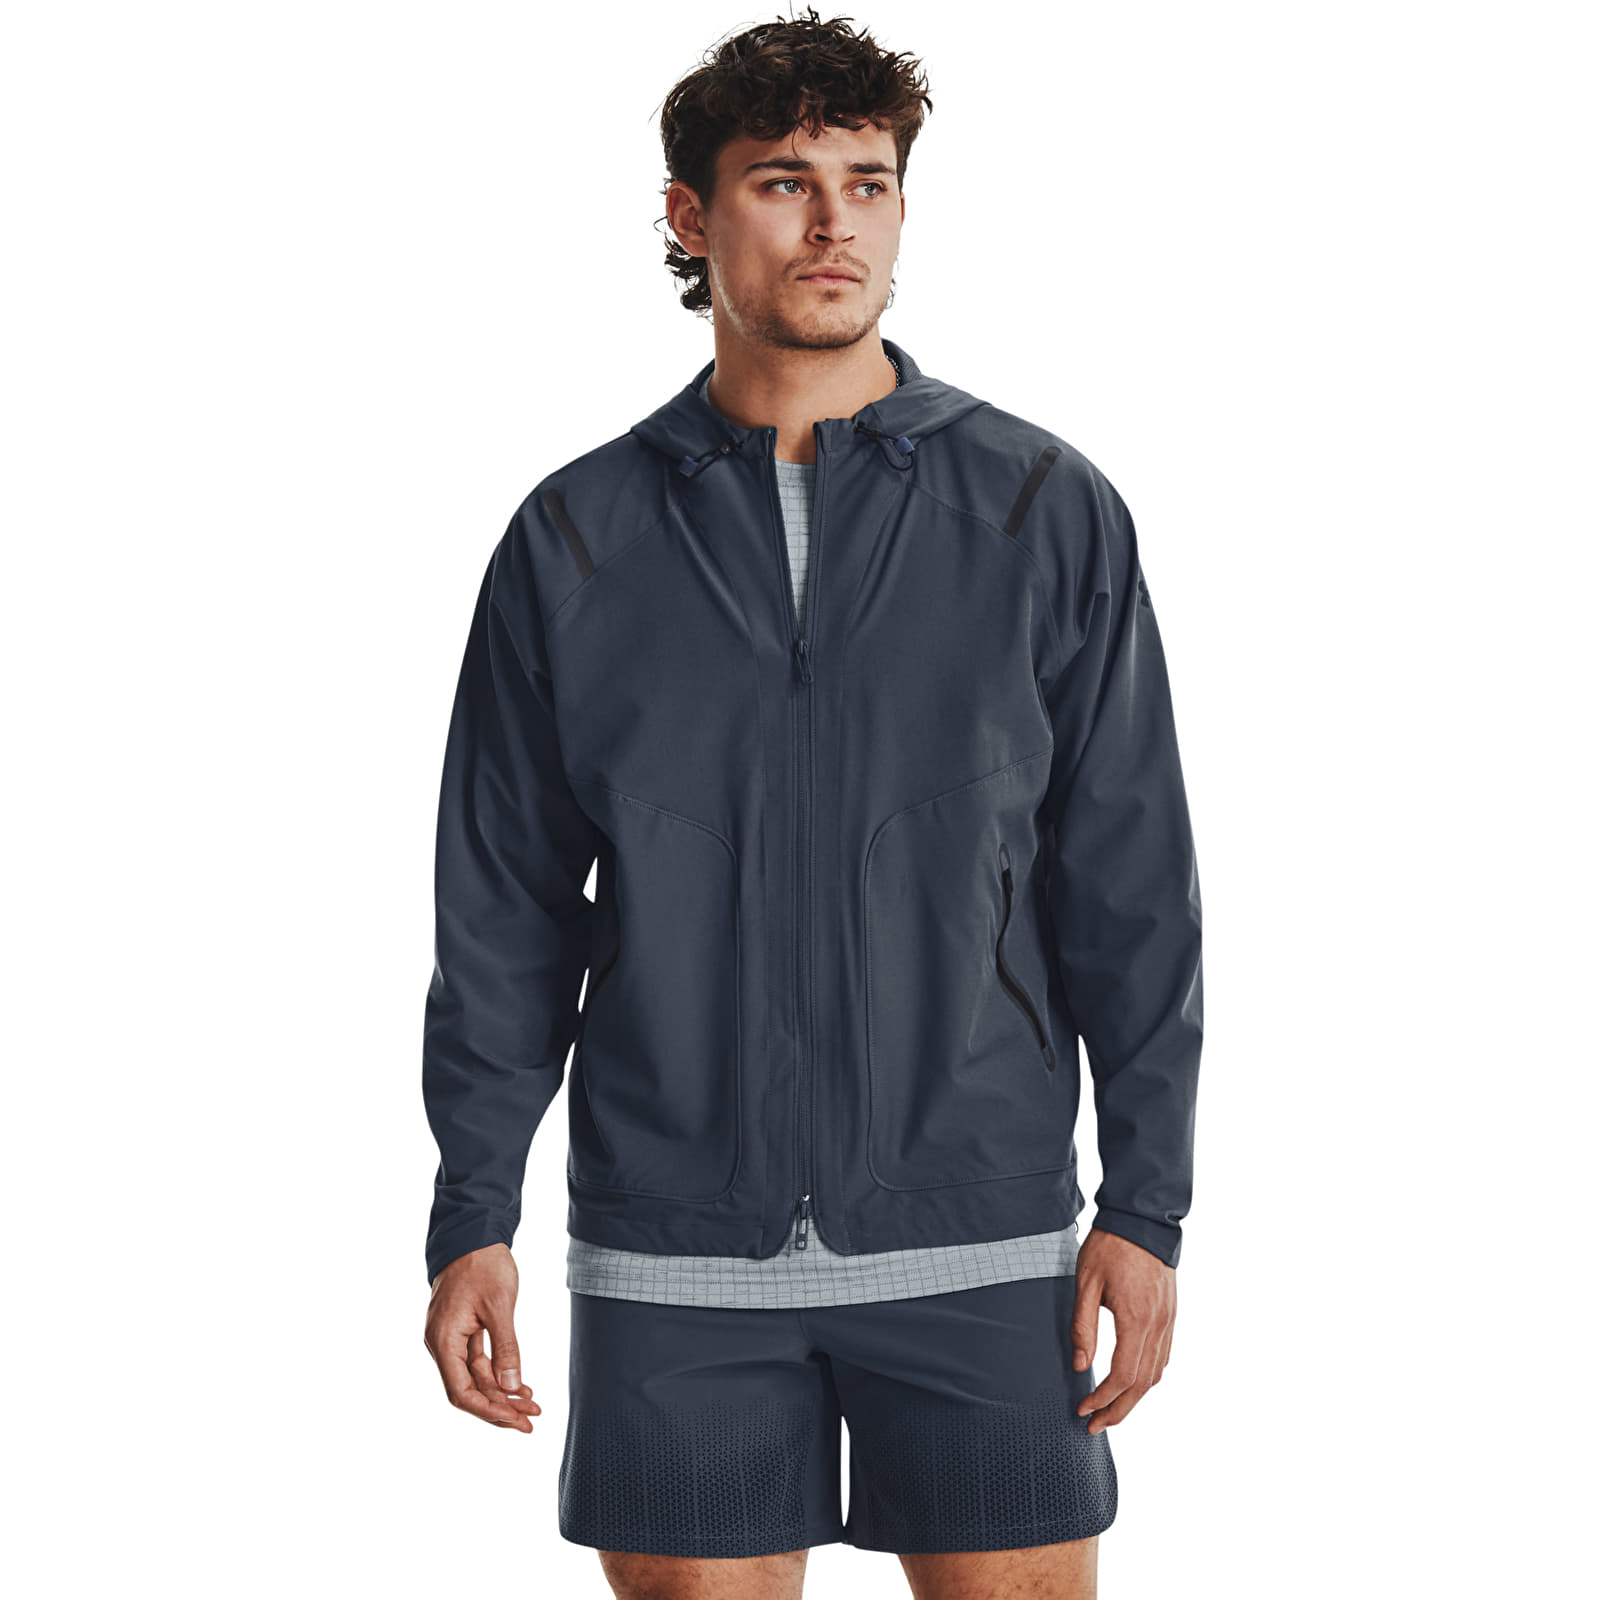 Jakne Under Armour Unstoppable Jacket Gray